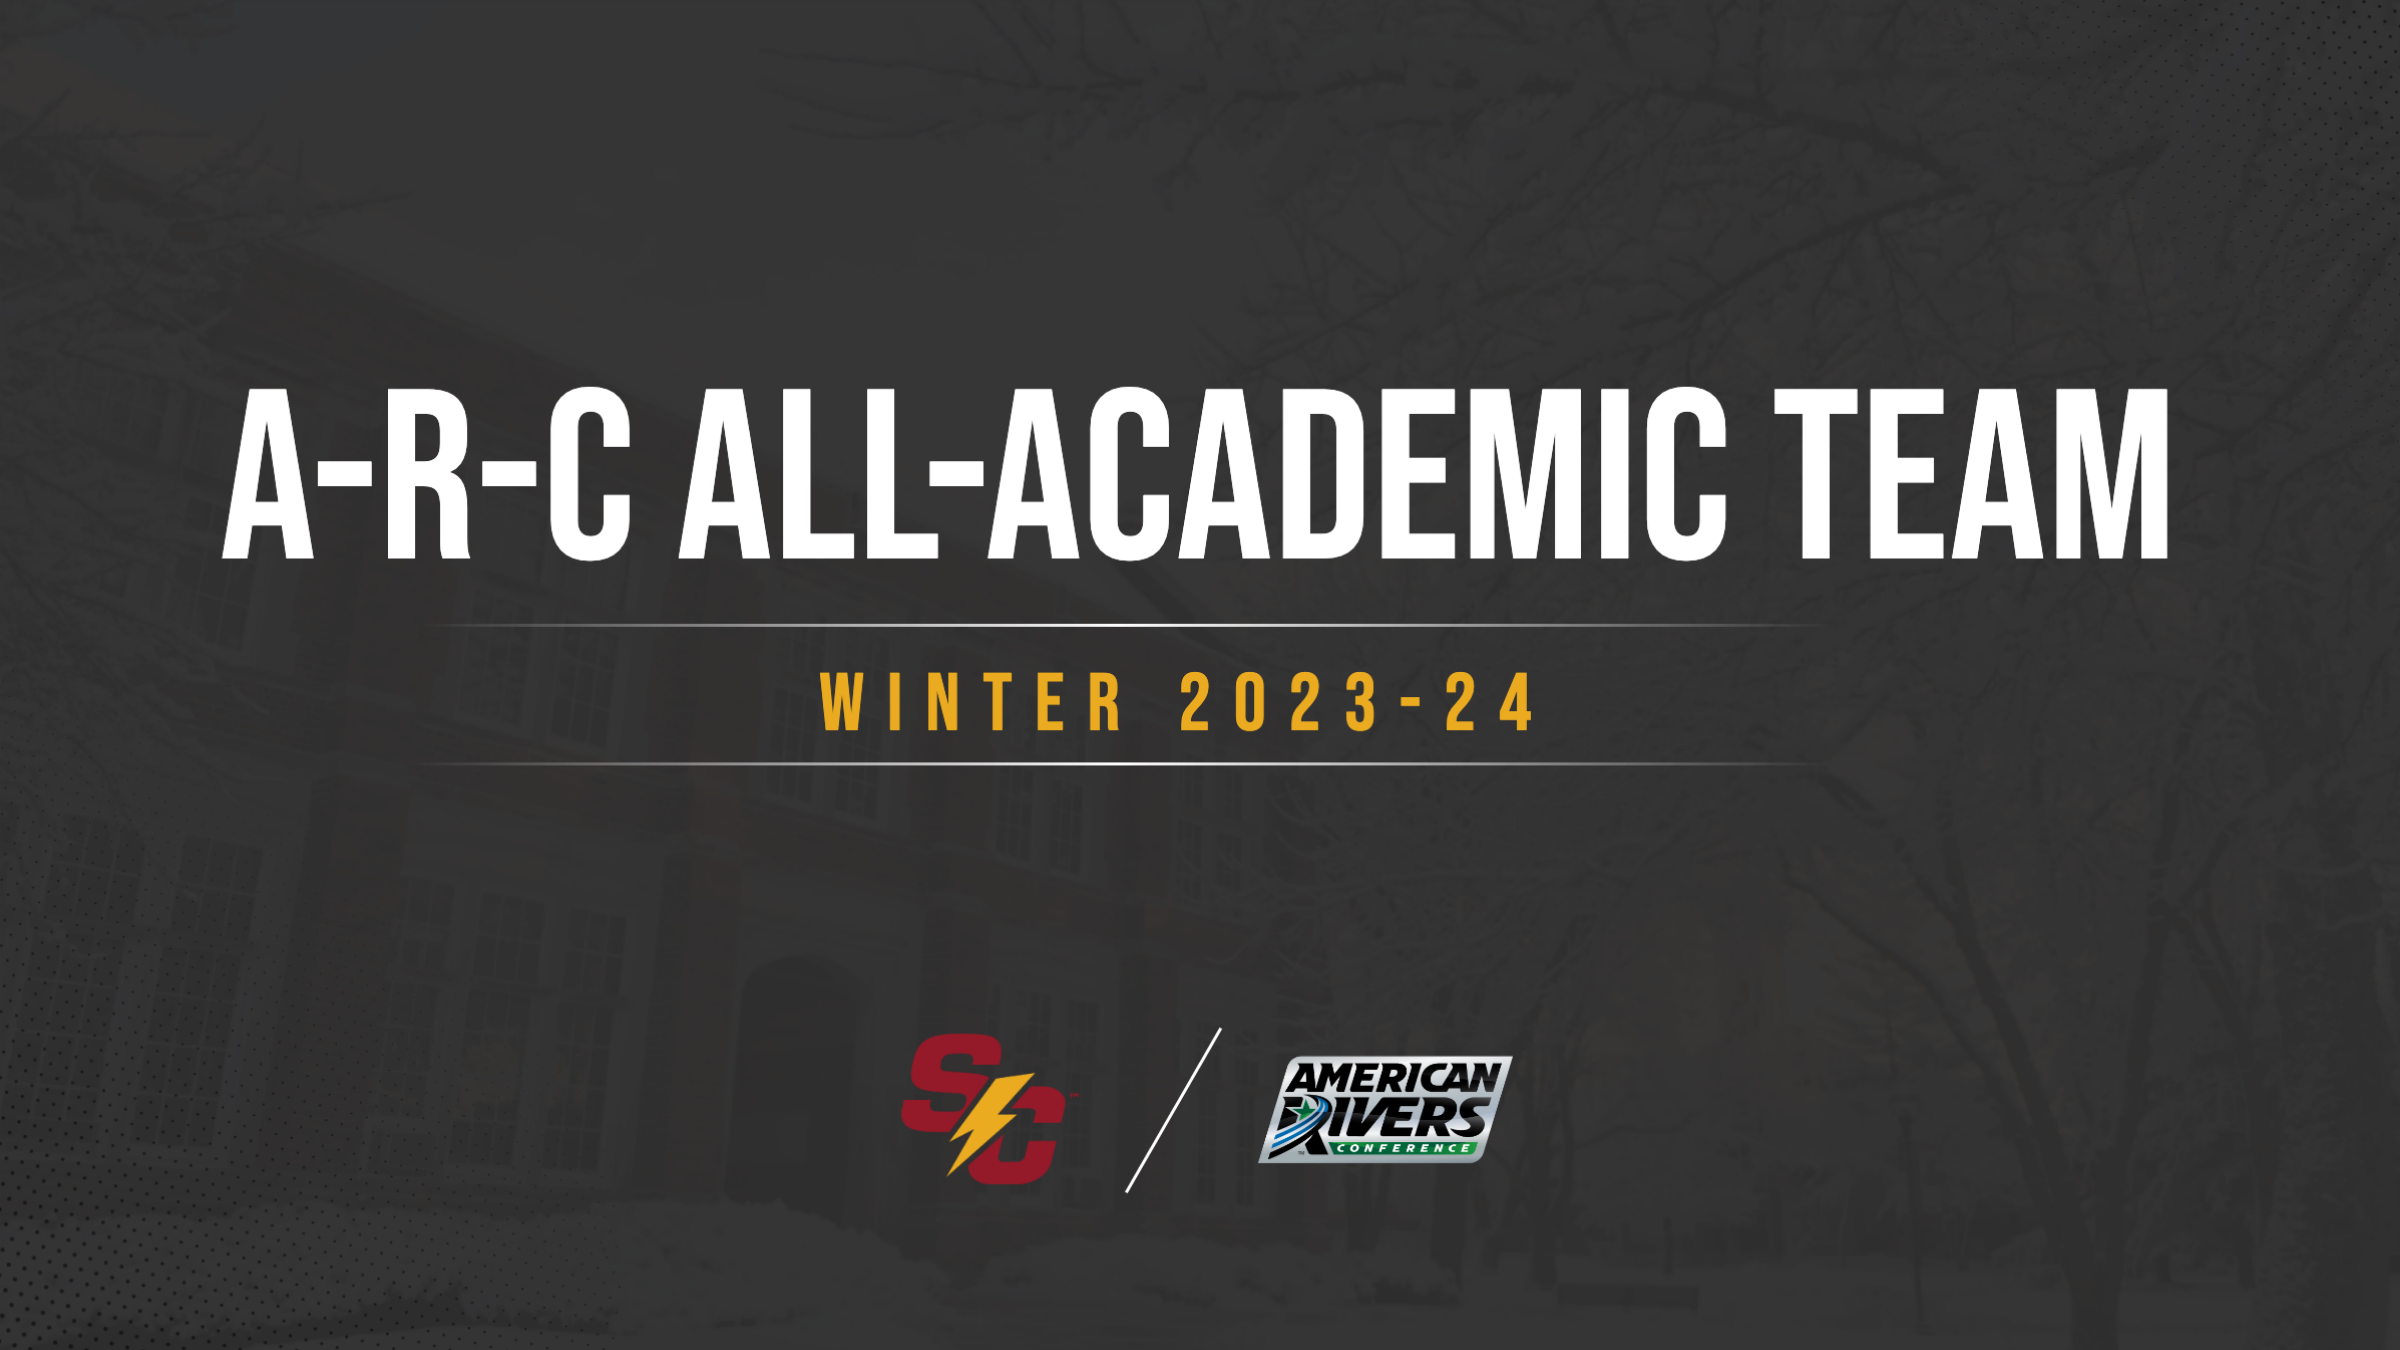 Thirty-one student-athletes named A-R-C All-Academic